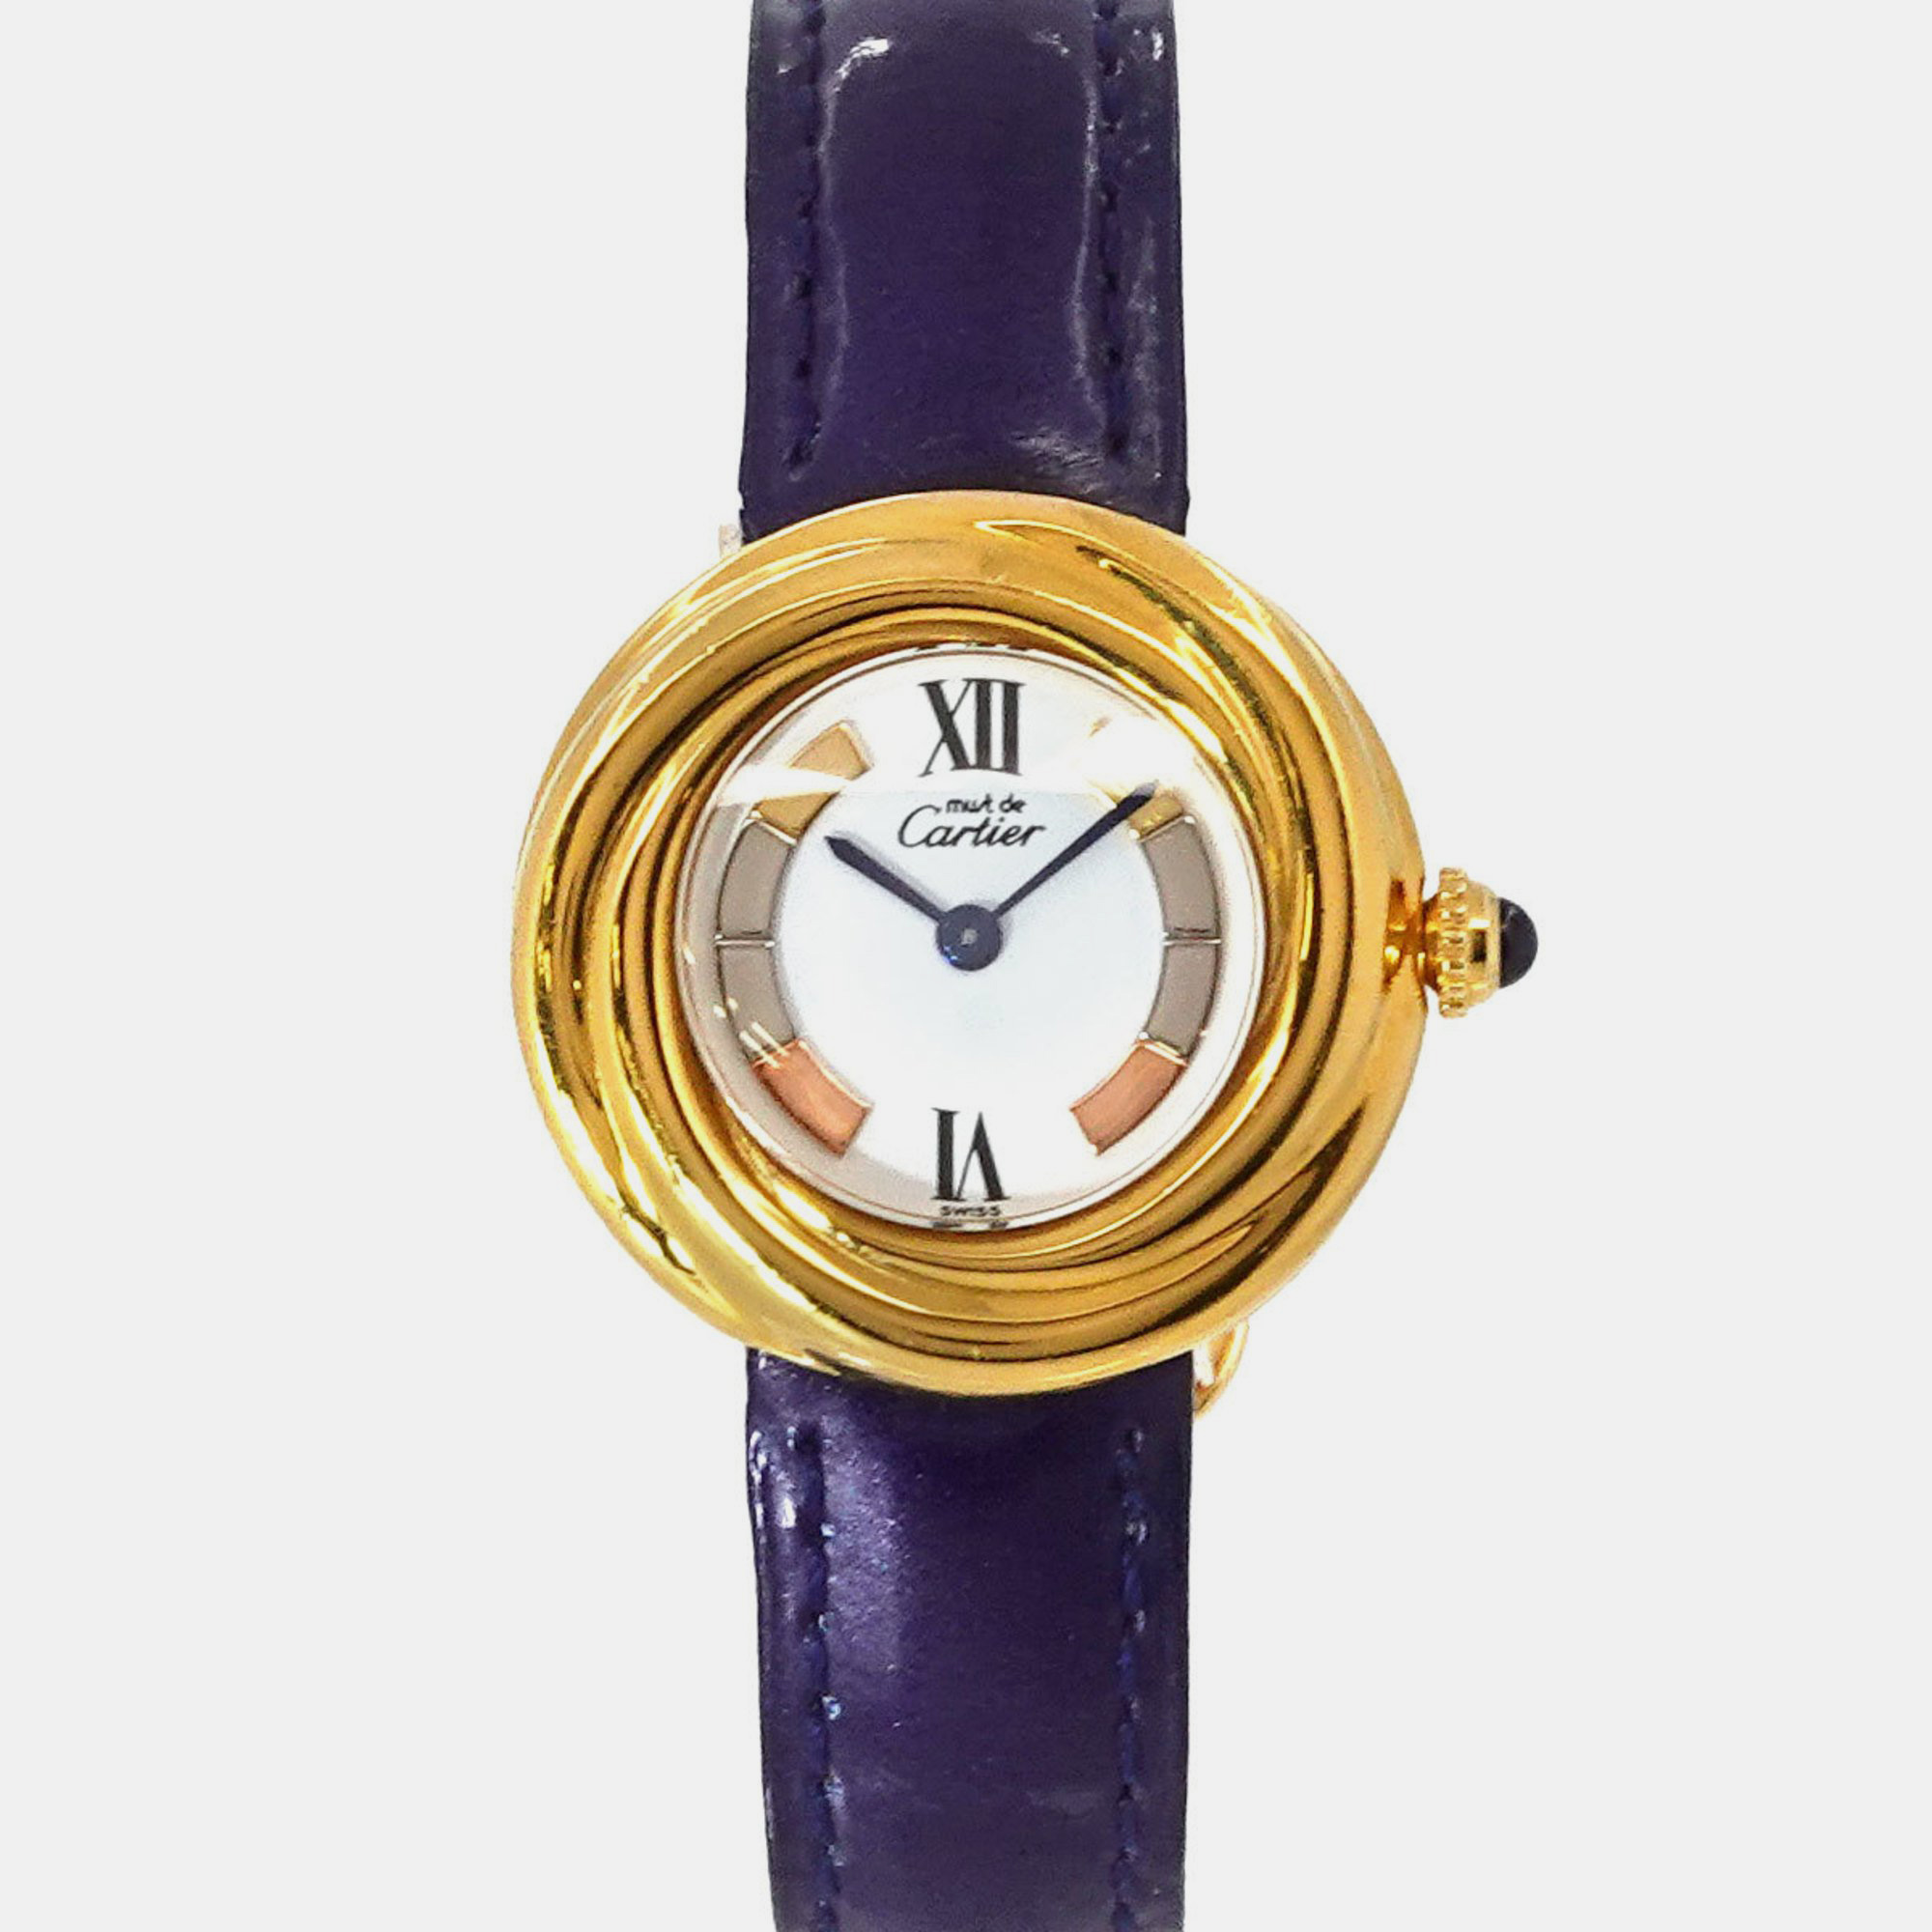 Sophisticated design and traditions of fine watchmaking characterize this Cartier designer timepiece. Grace your wrist with this luxurious piece and instantly elevate your day.